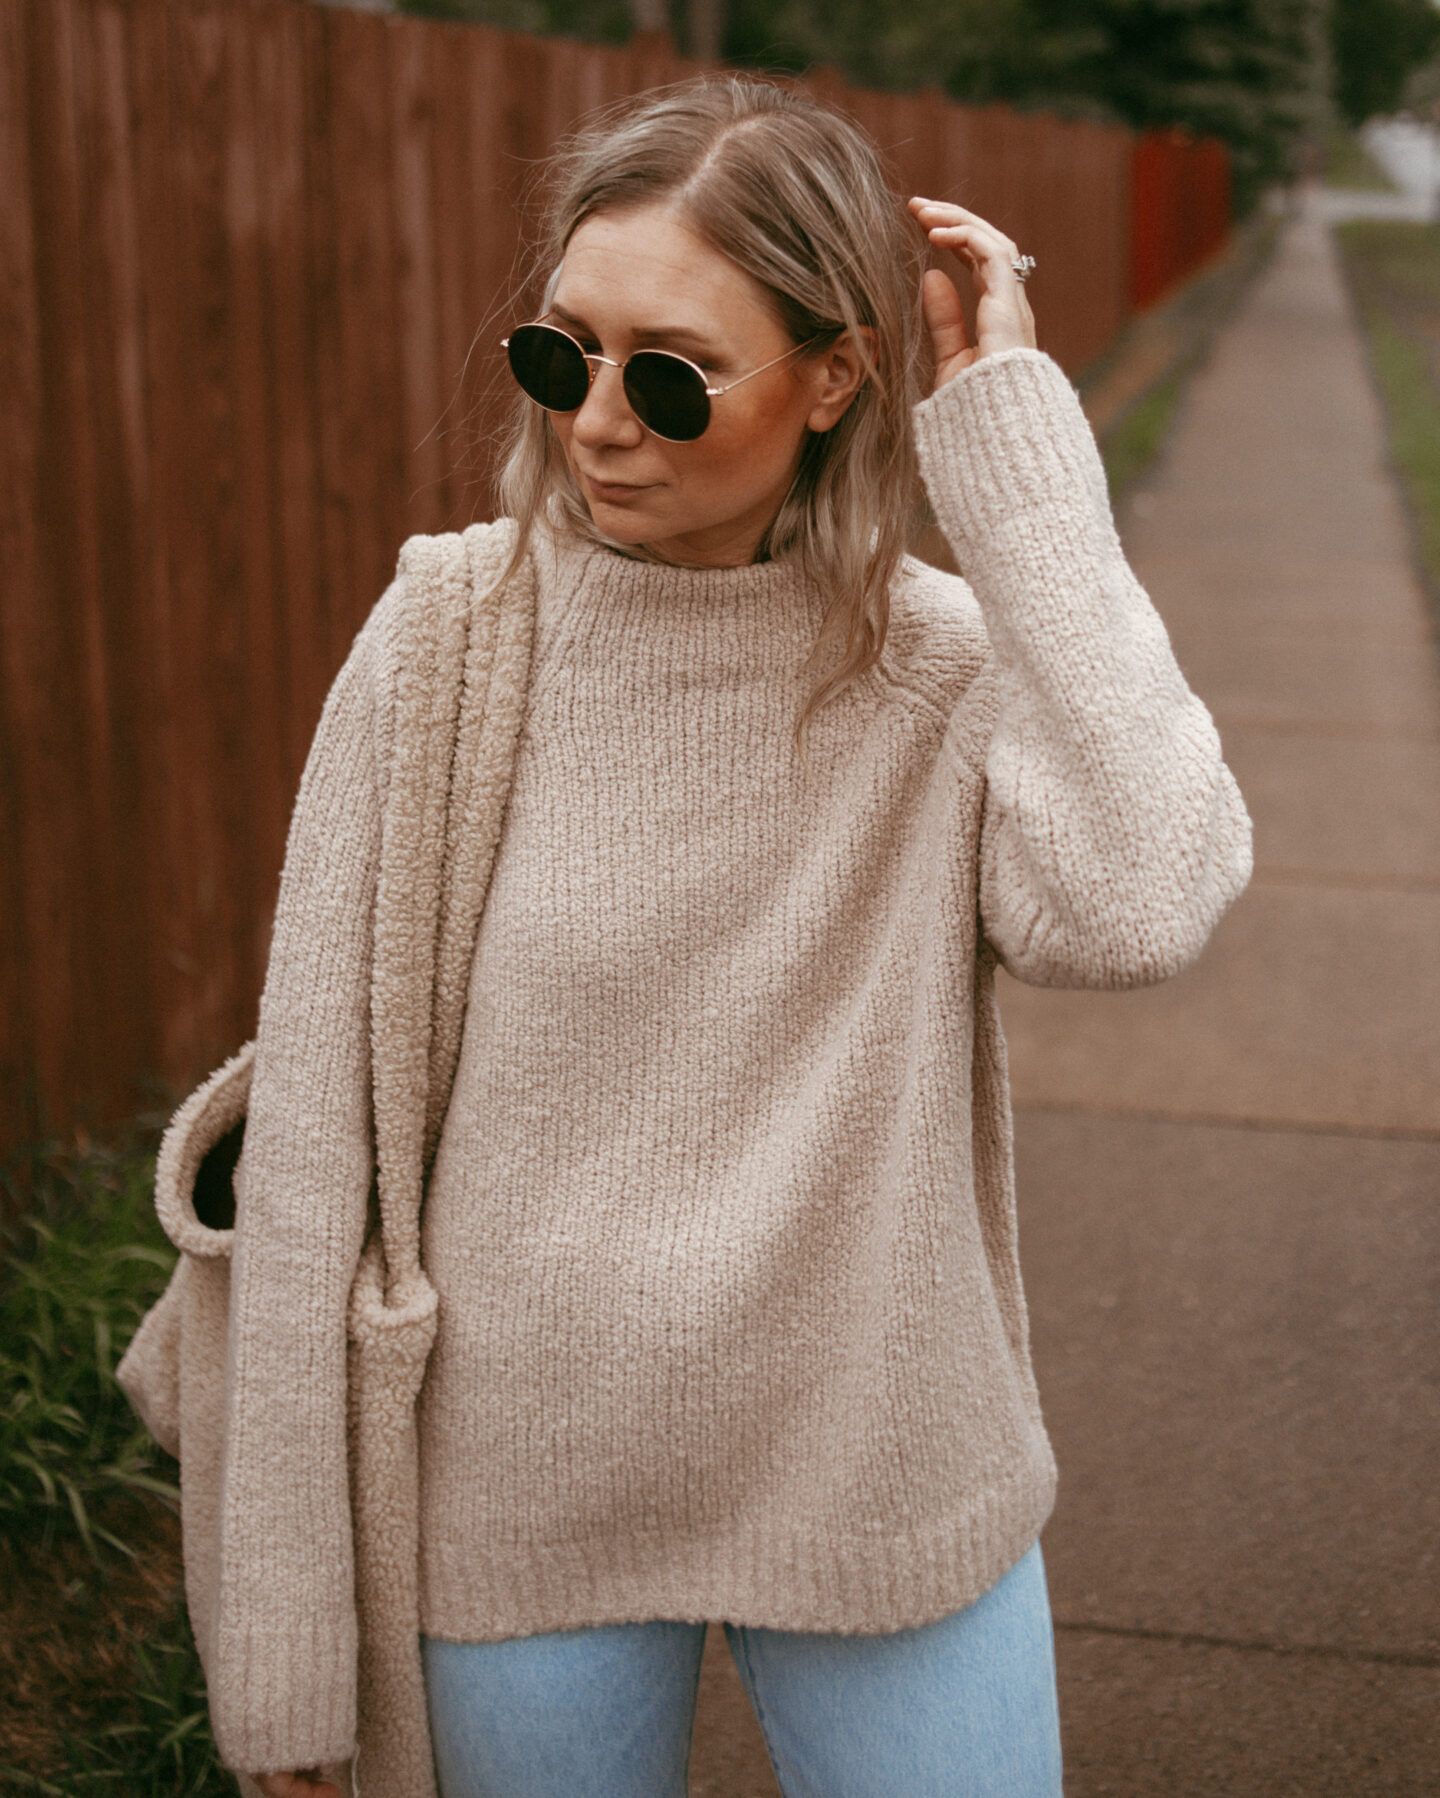 Karin Emily wearing an oversized cozy sweater for fall and a pair of light wash levi's with a studio noos sherpa bag